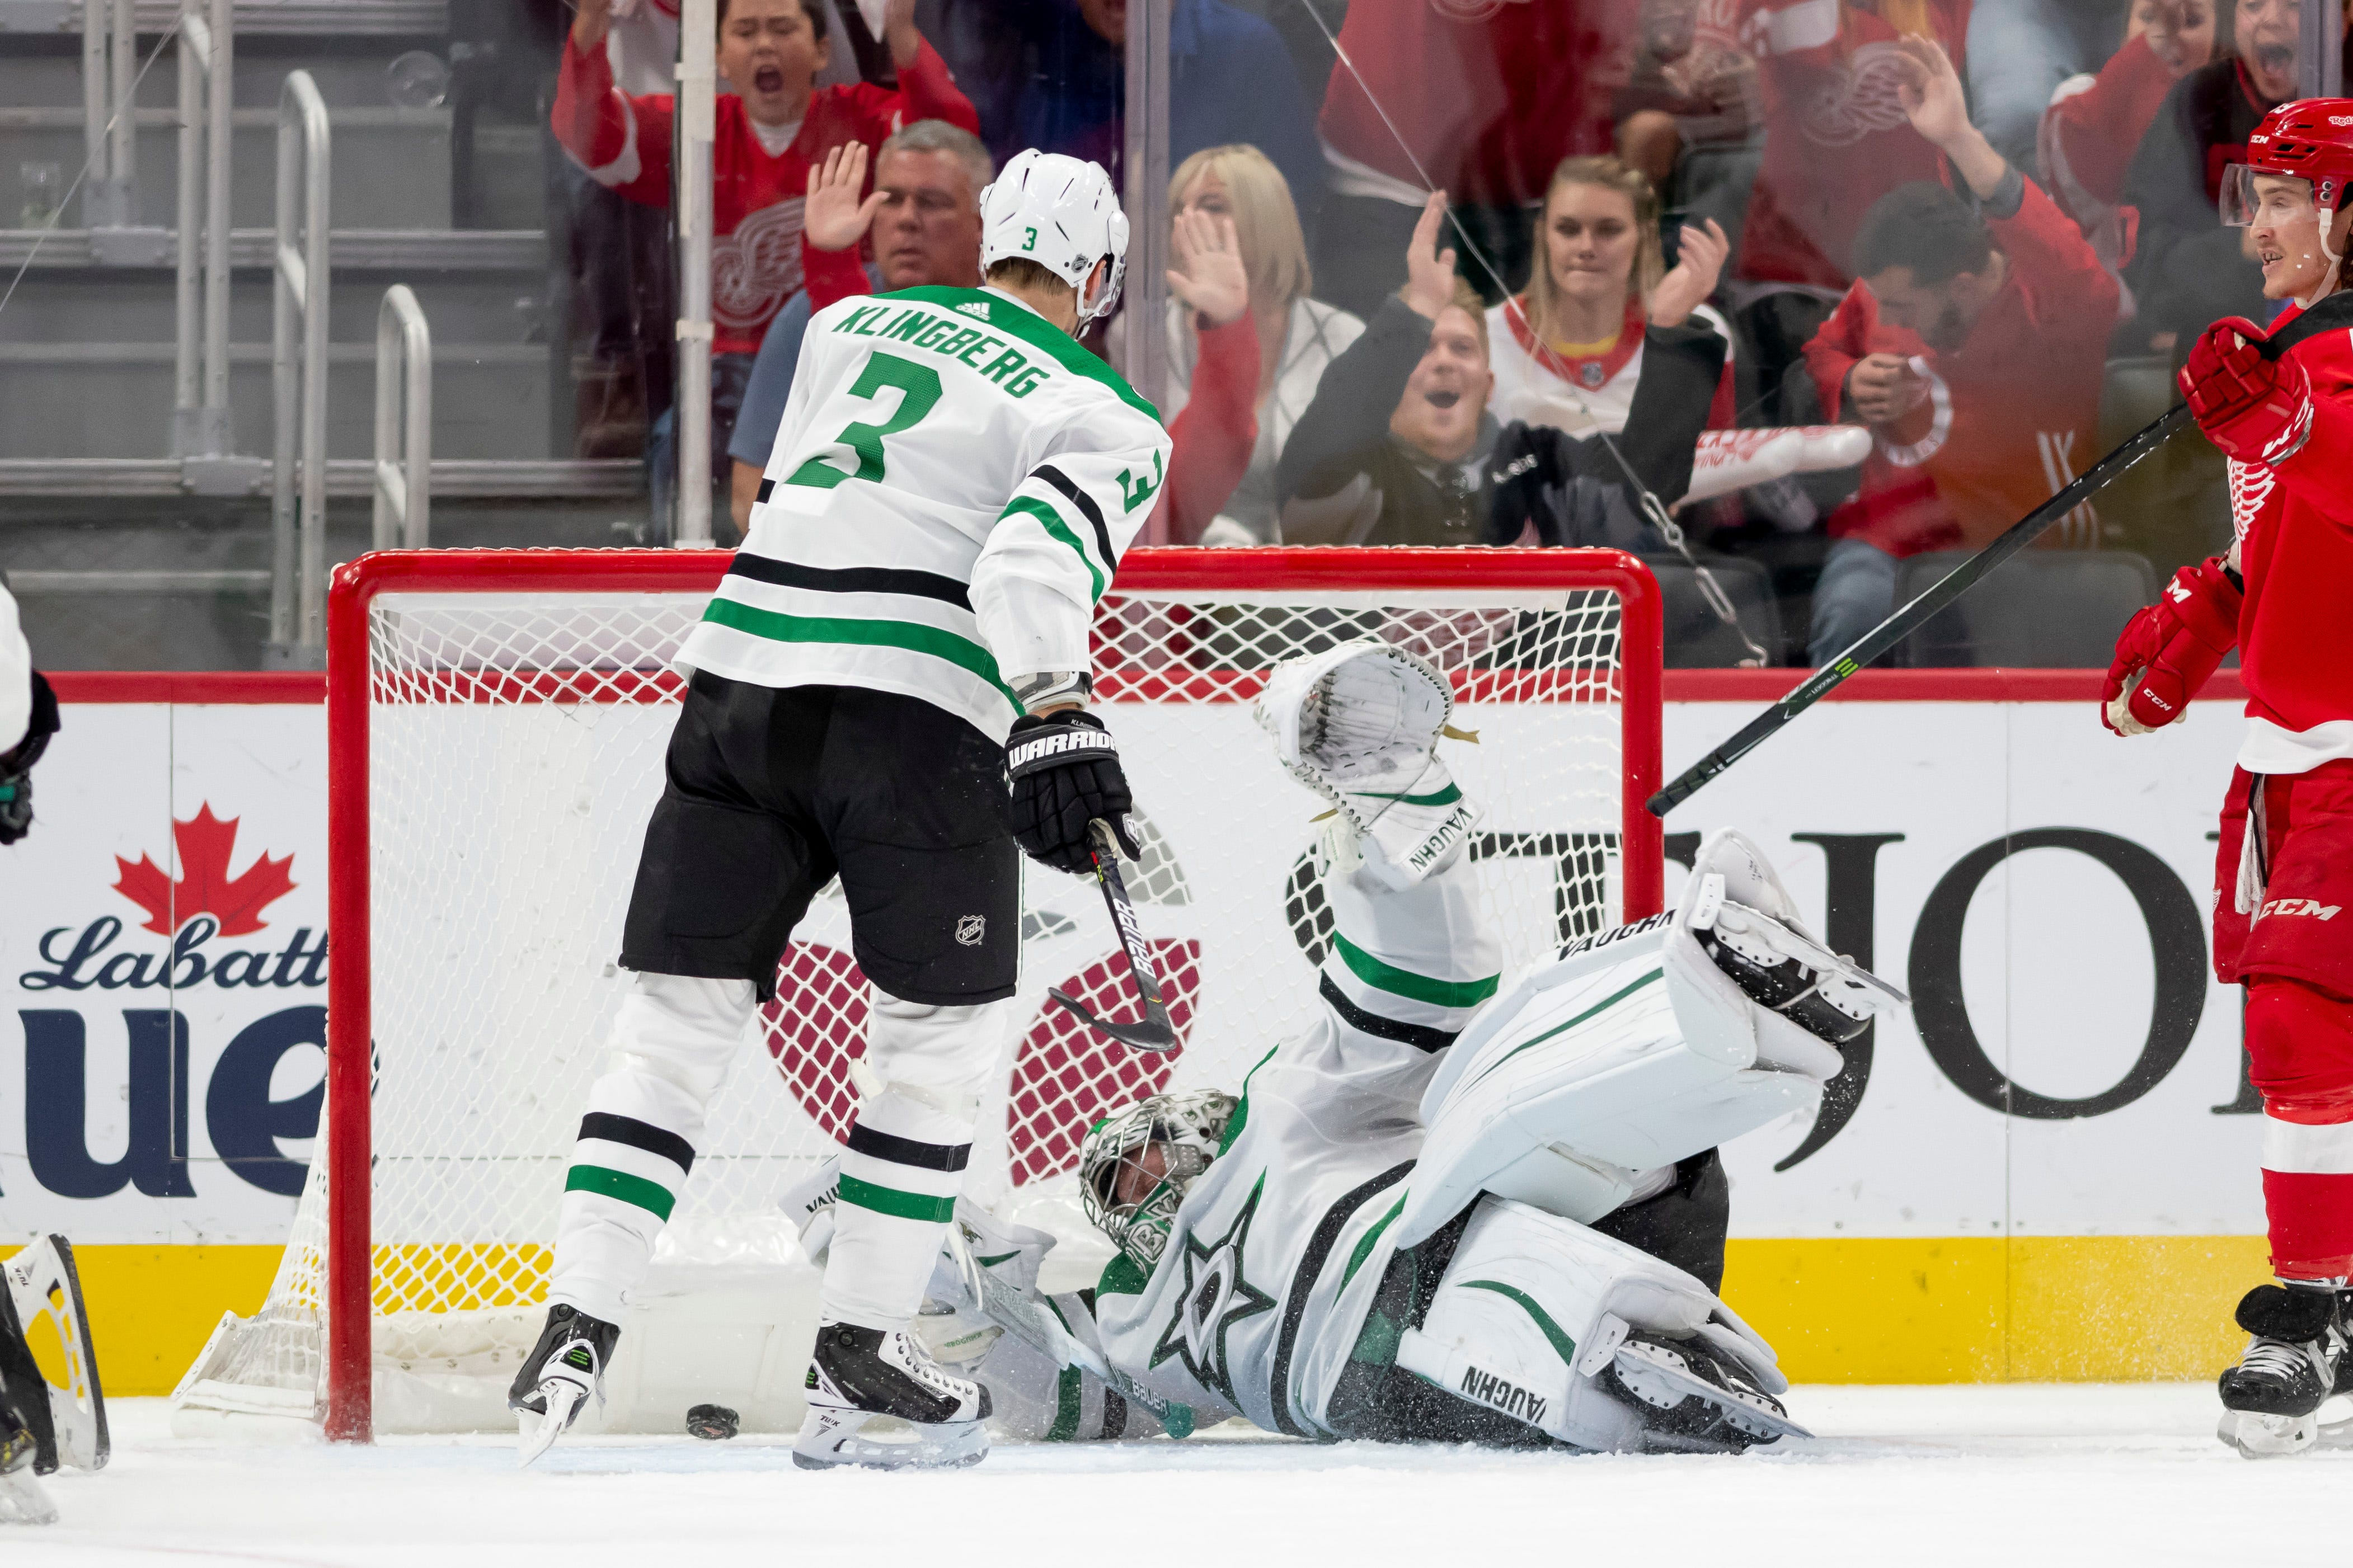 Dallas defenseman John Klingberg and goaltender Anton Khudobin fails to stop a goal by Detroit right wing Anthony Mantha in the second period.